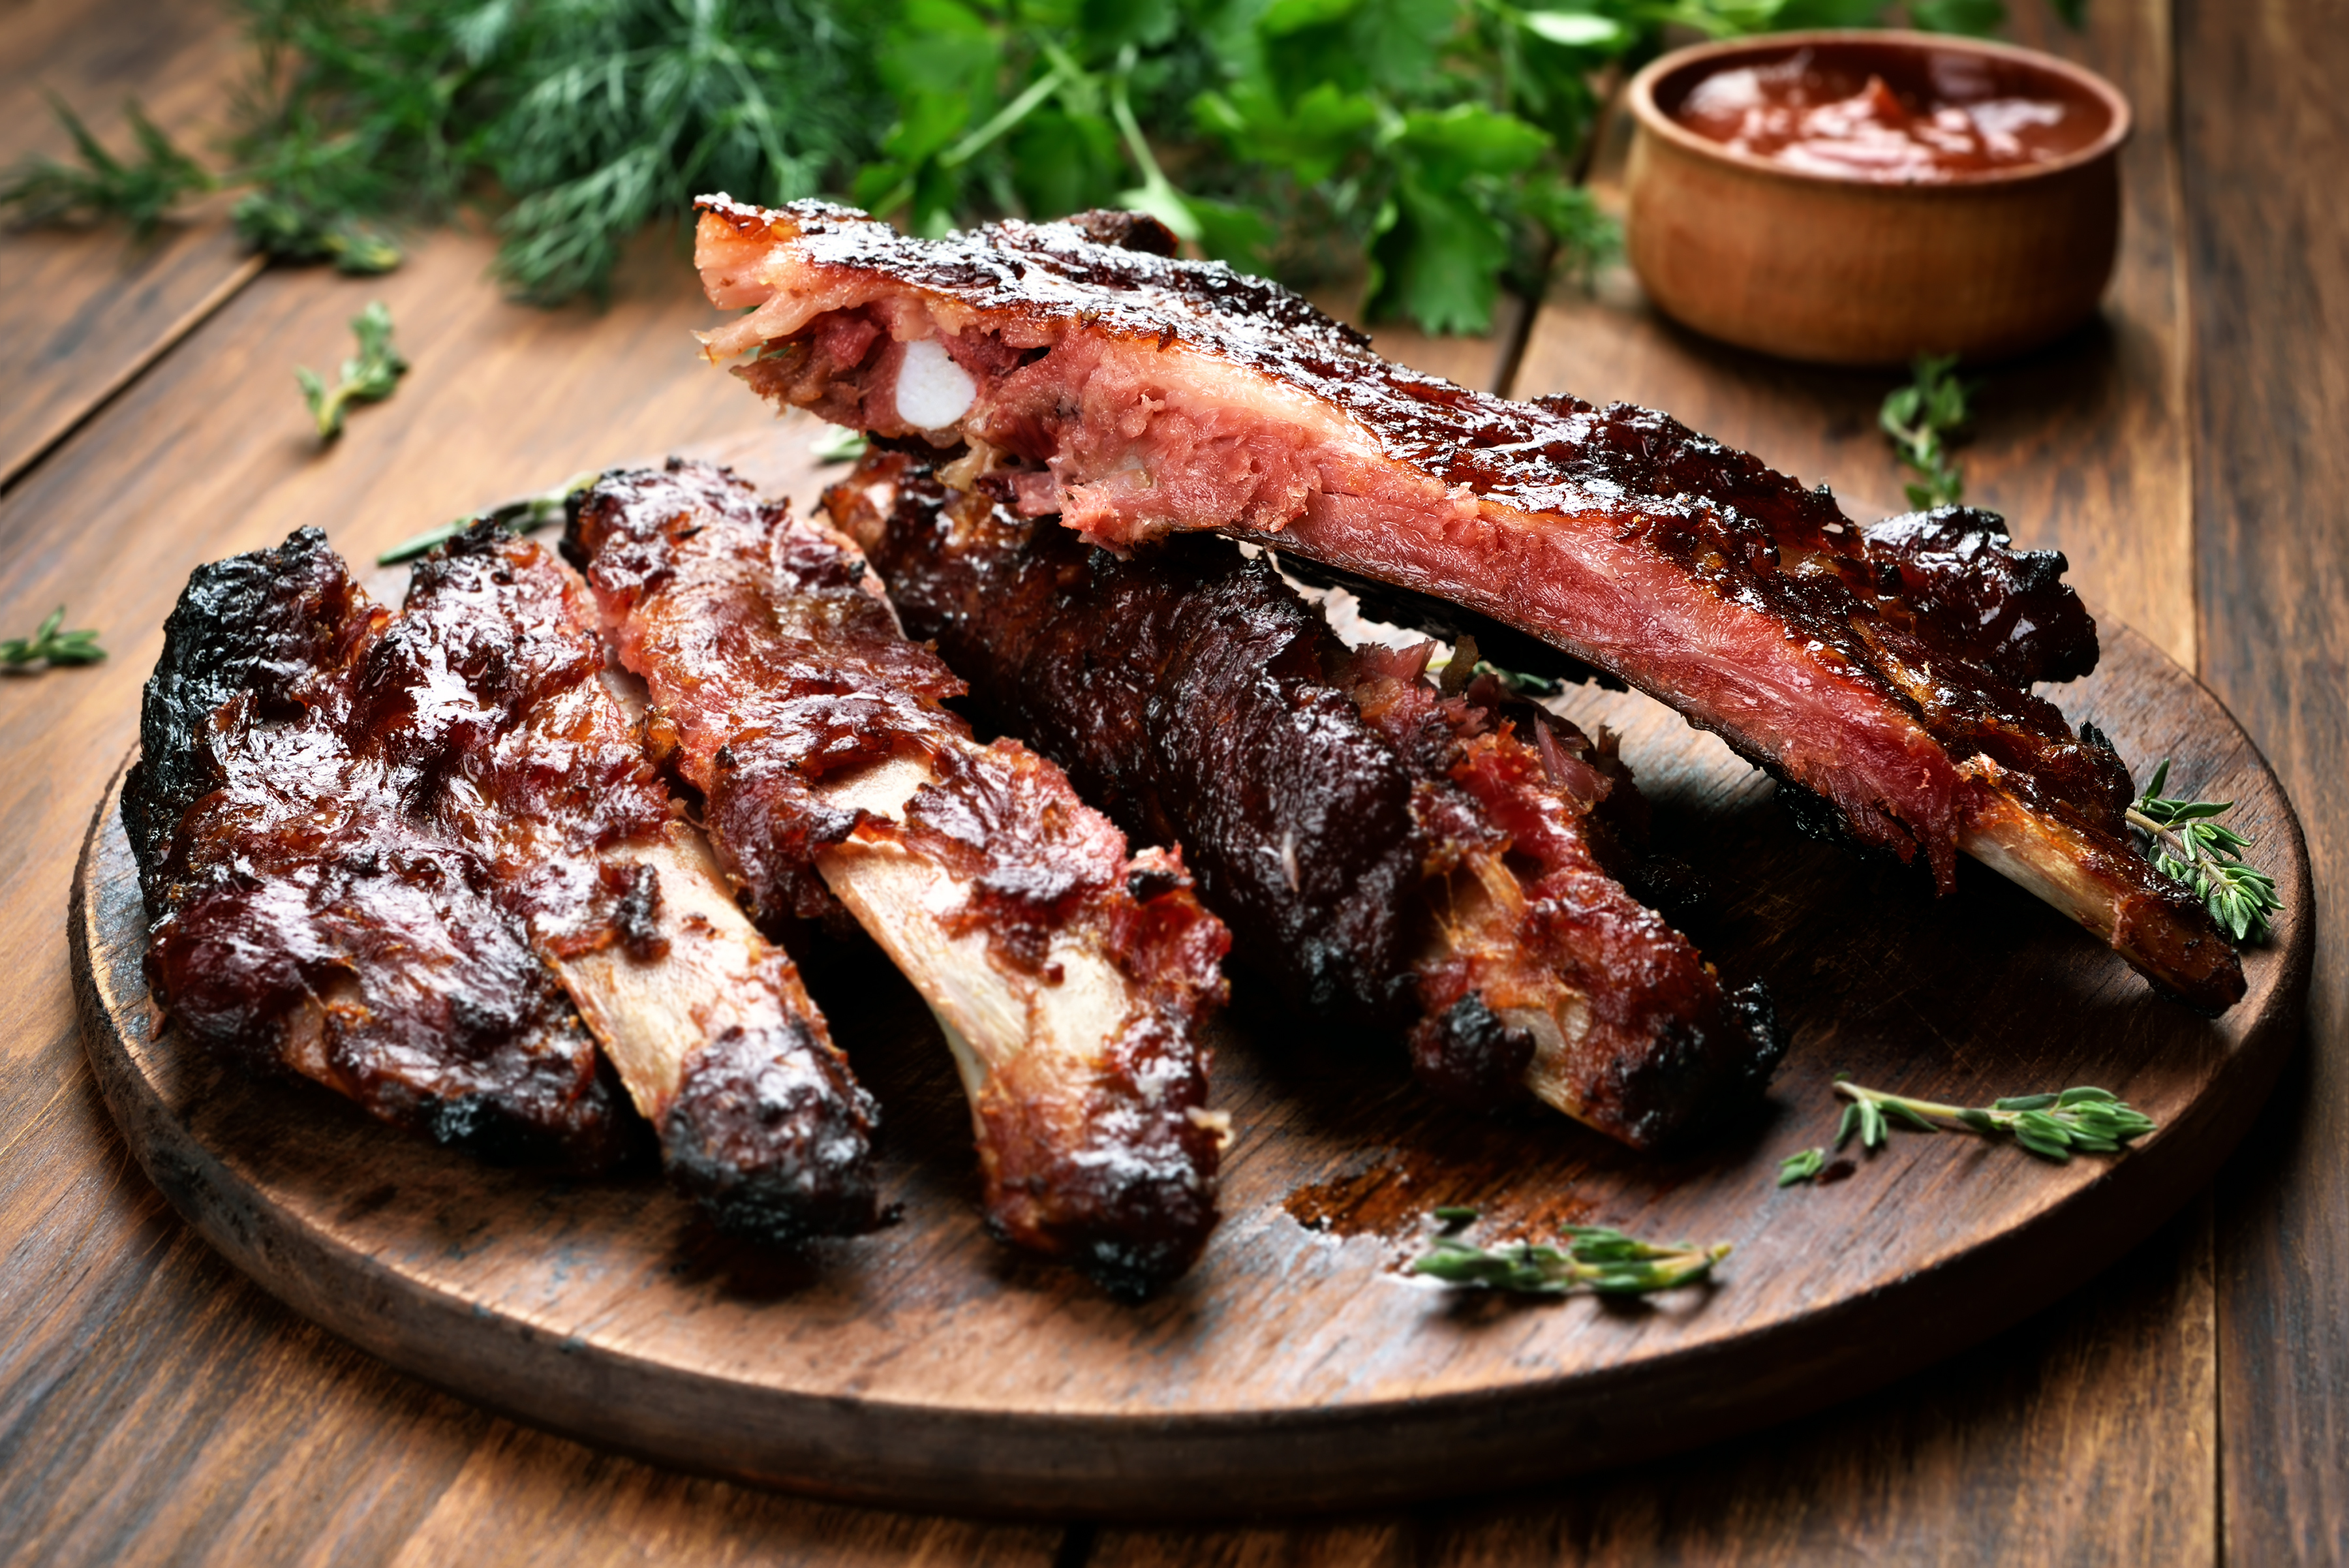 Ribs (and Method to | Defrost the Fastest) Is livestrong How Which